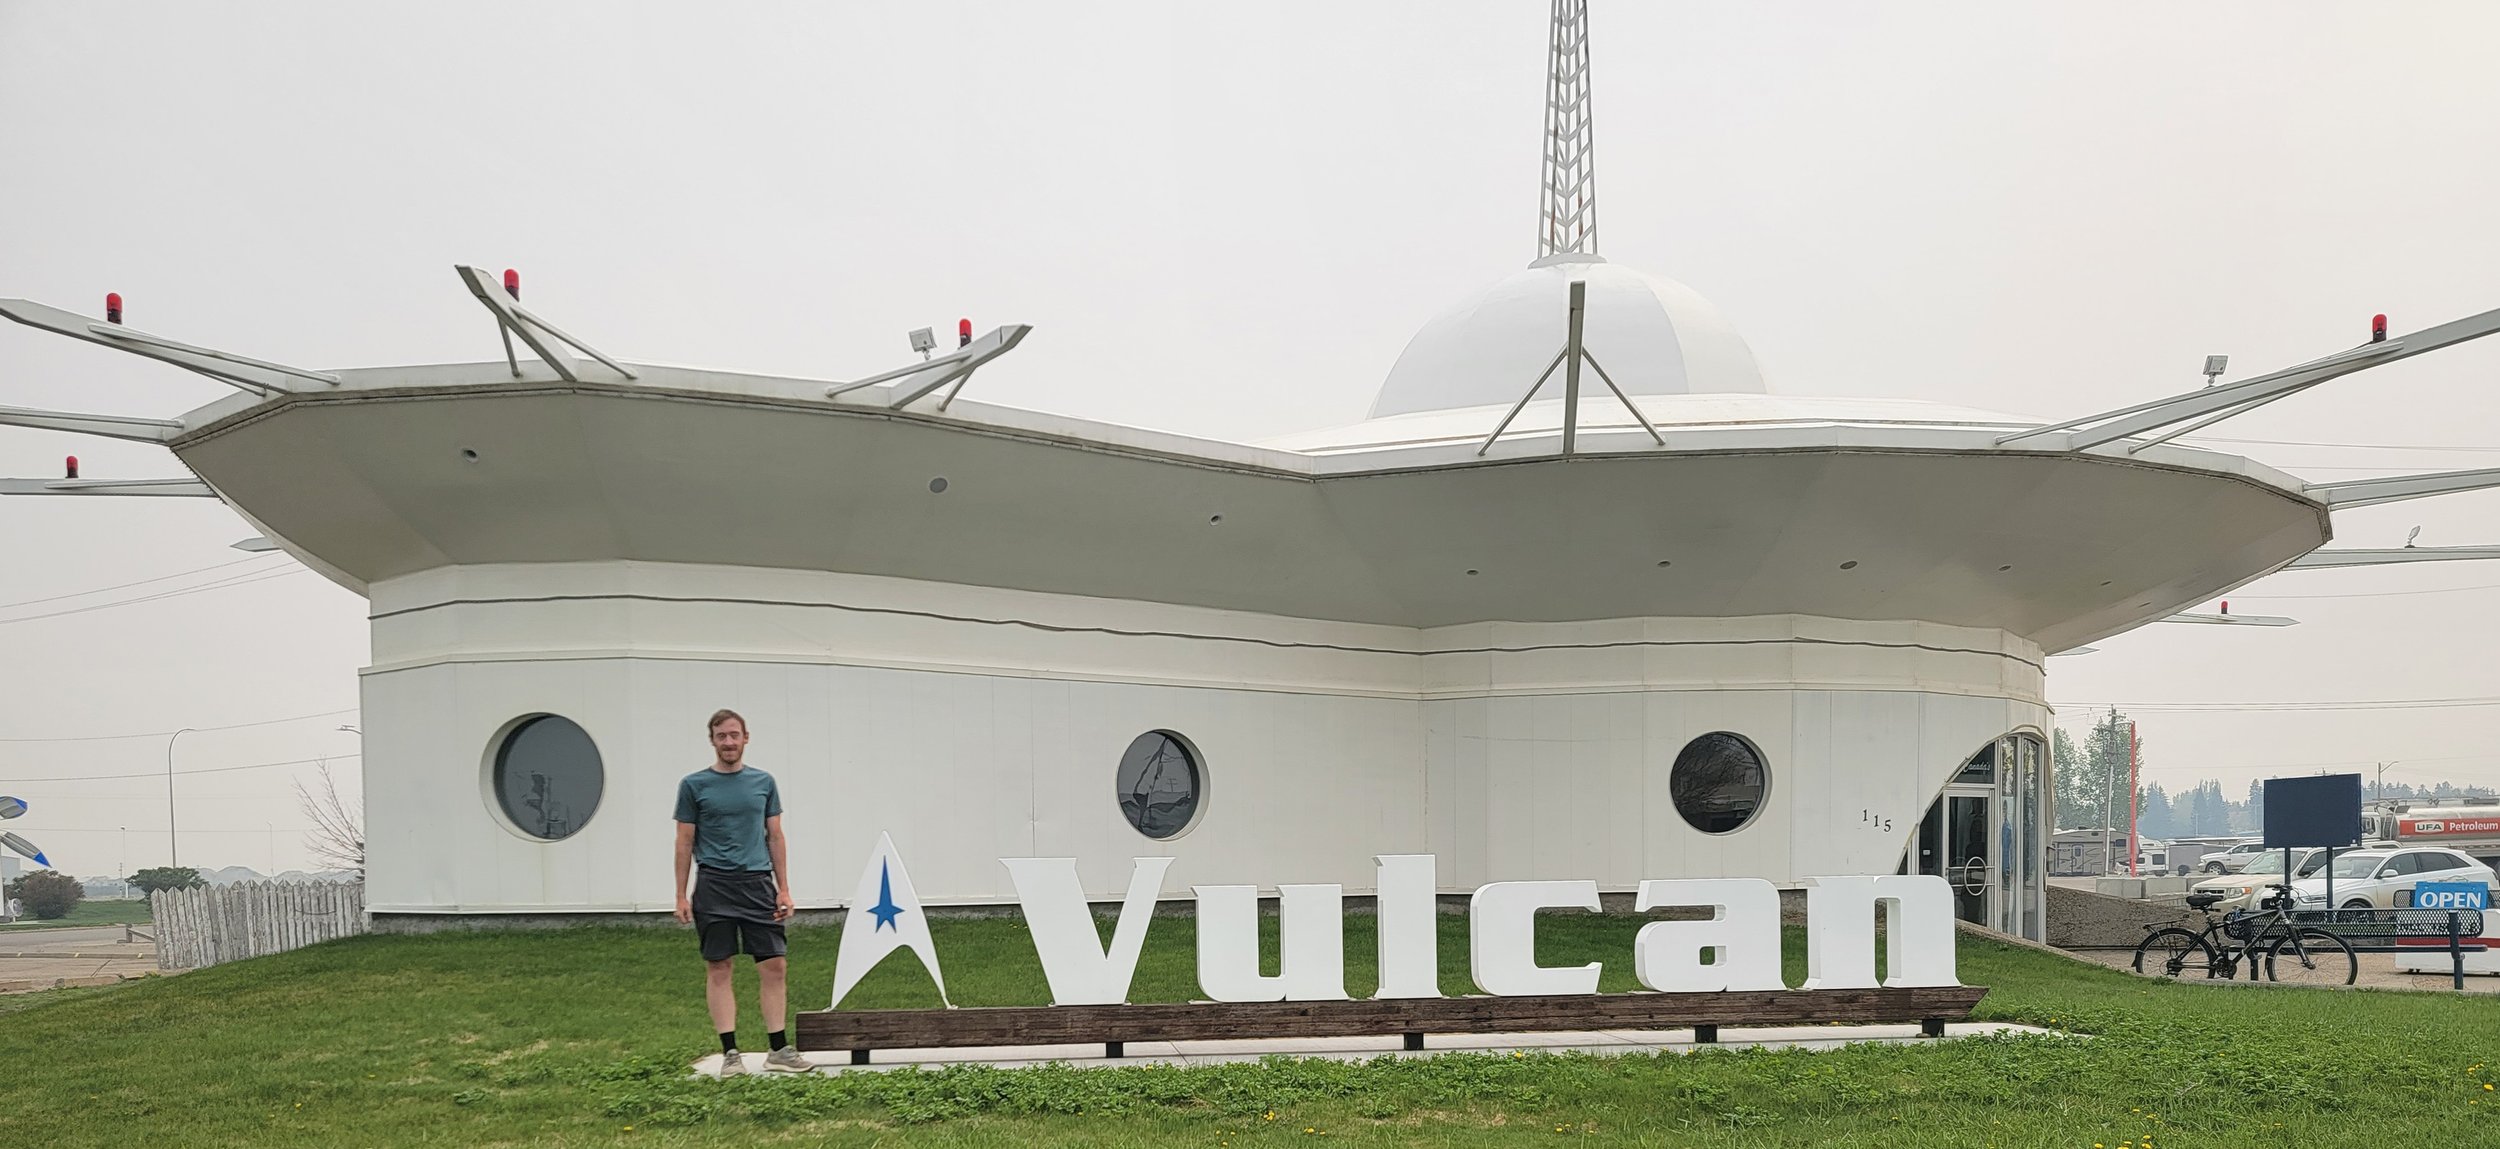 About an hour south of Calgary you can stop in Vulcan! 